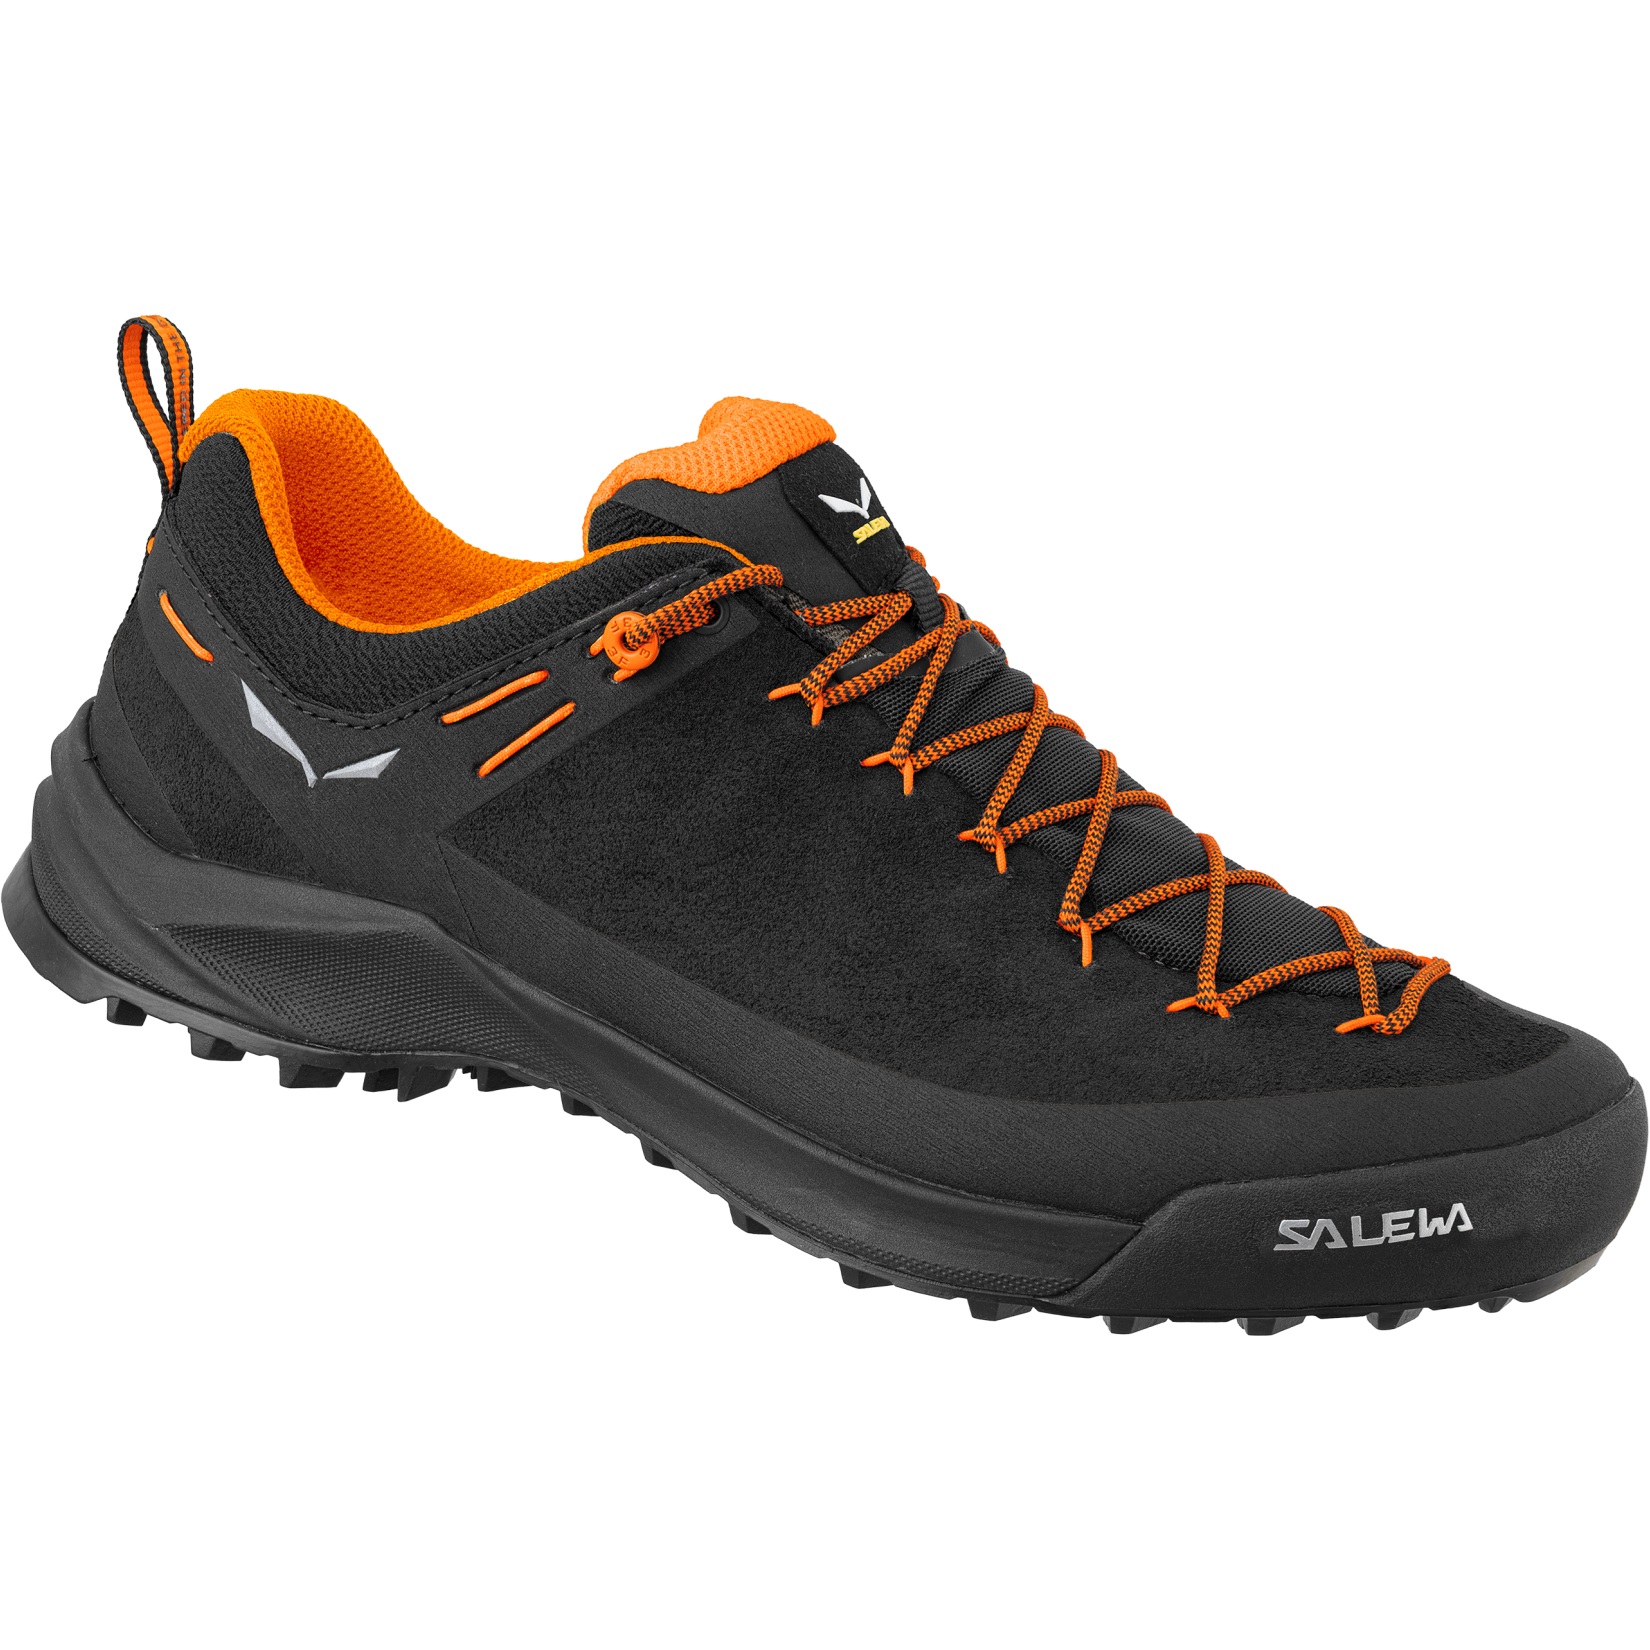 Image of Salewa Wildfire Leather Approach Shoes - black/fluo orange 0938